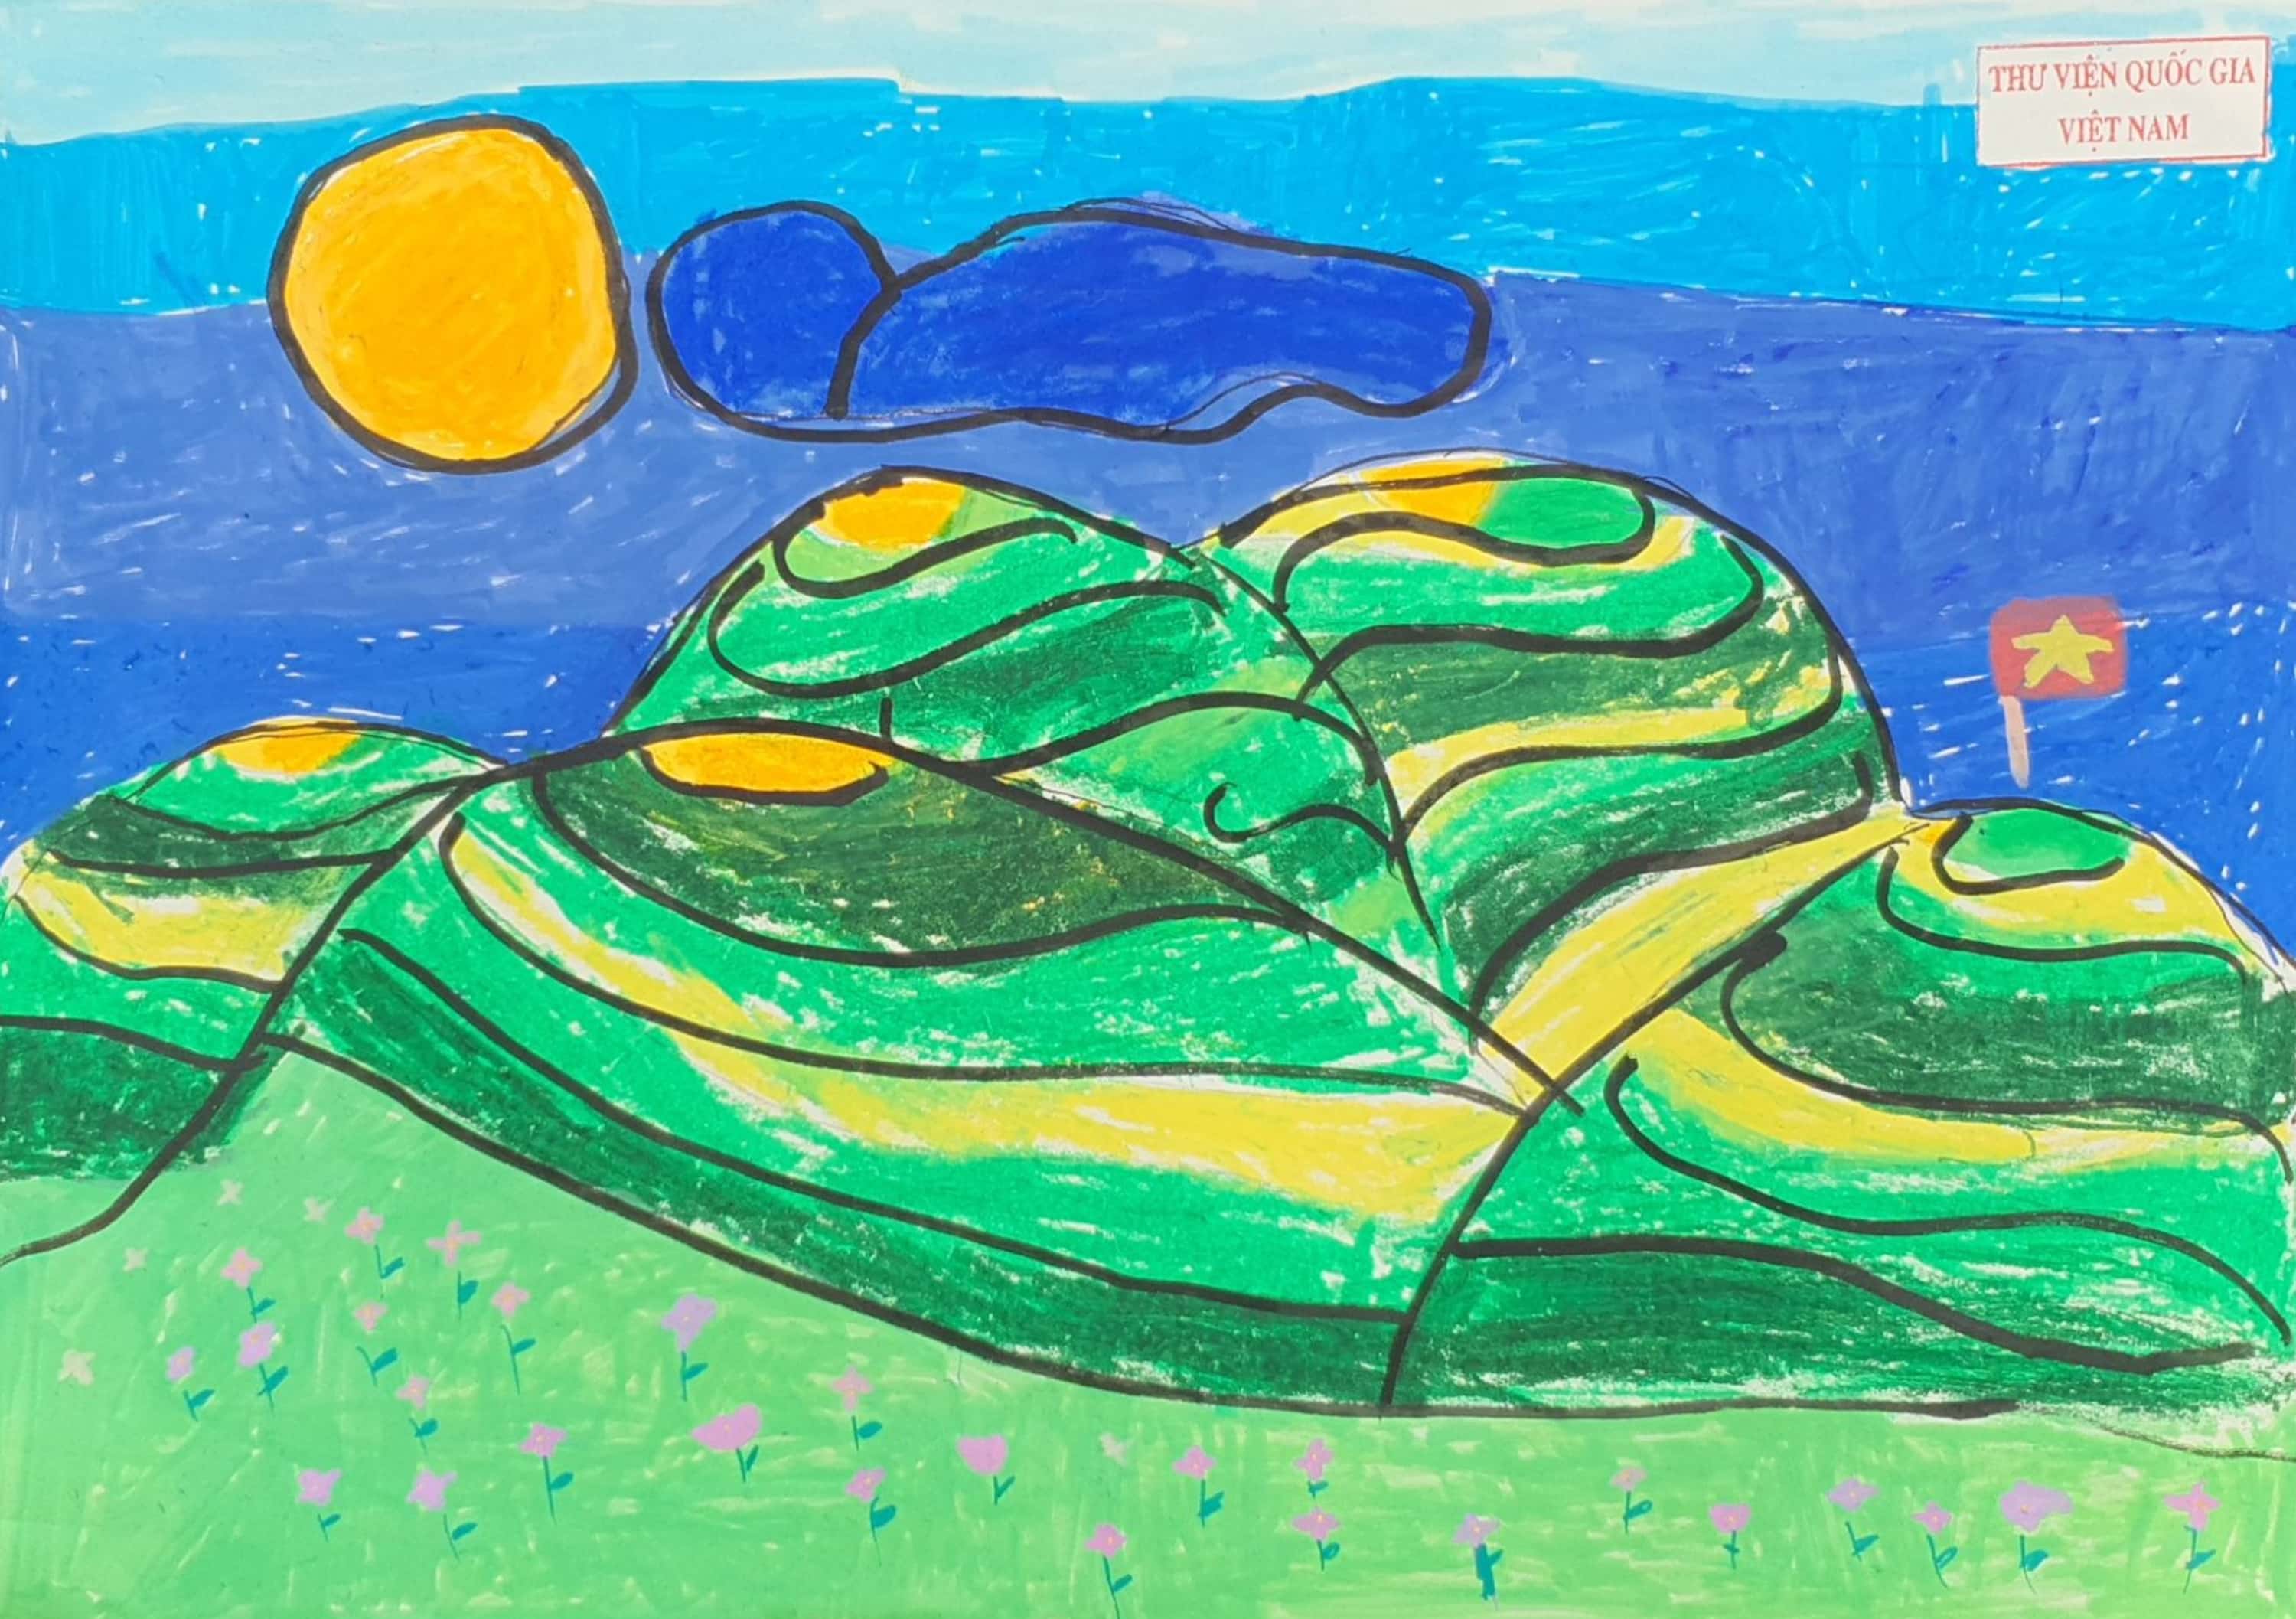 A drawing of a green hills and sun

Description automatically generated